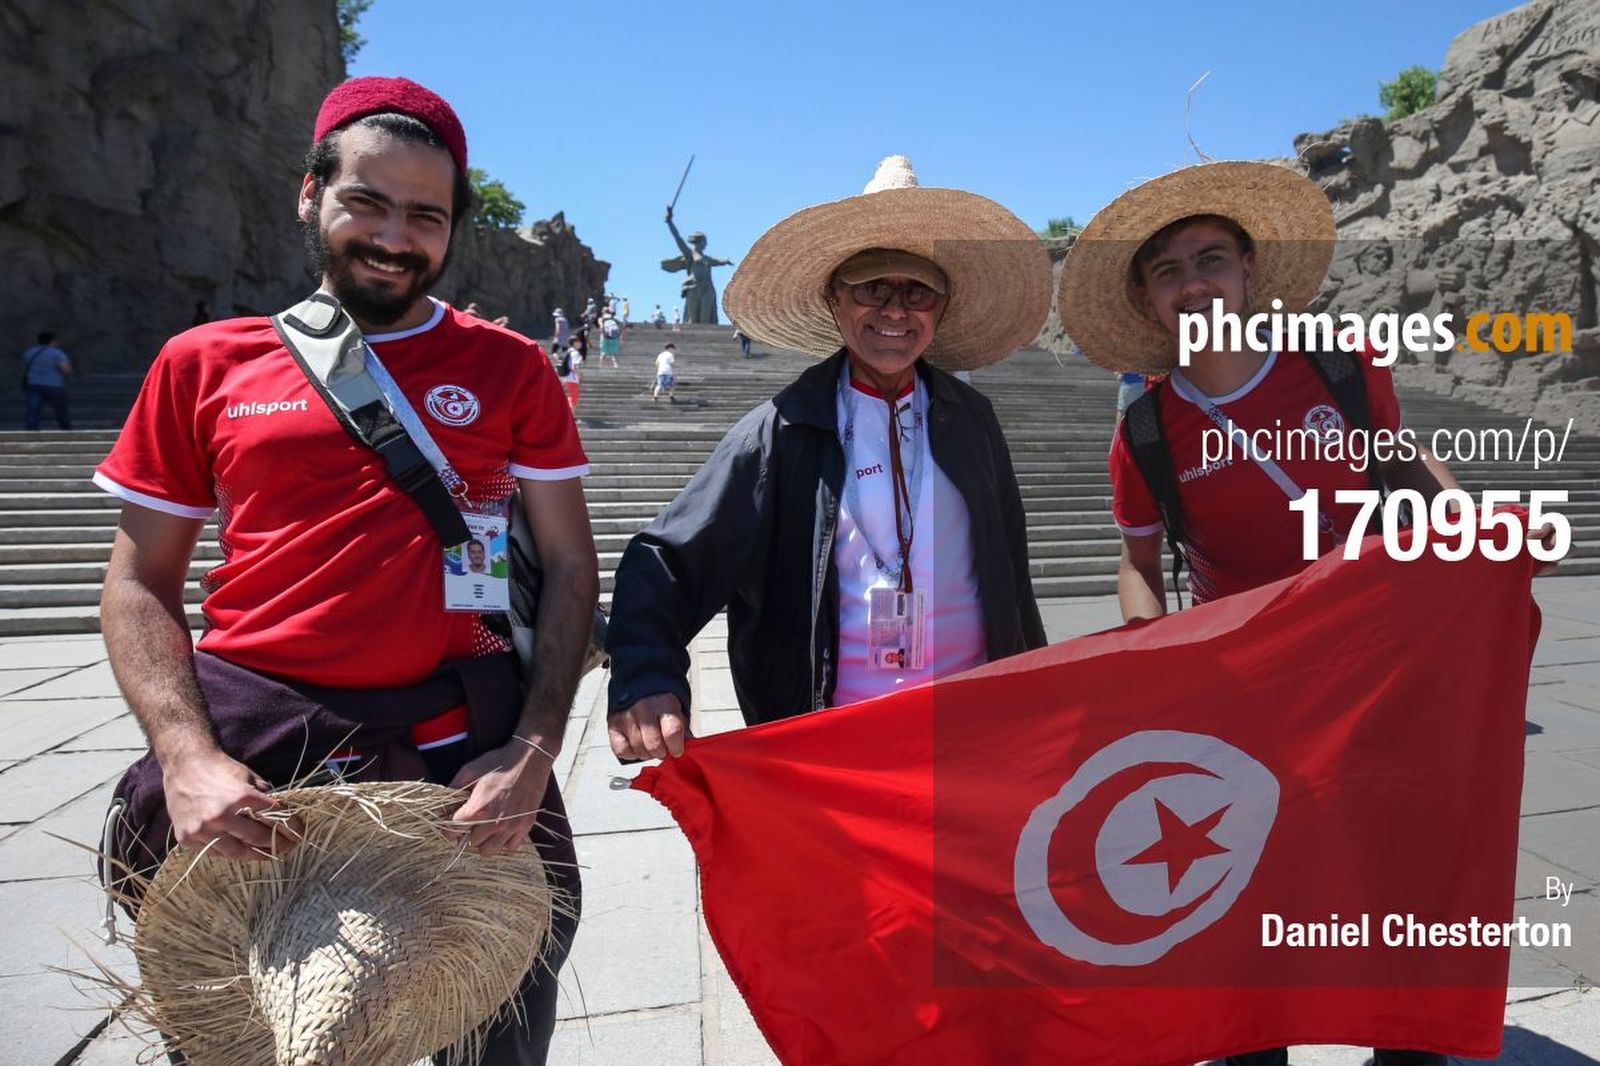 Tunisia fans pose for photos in front of the Motherland Calls statue